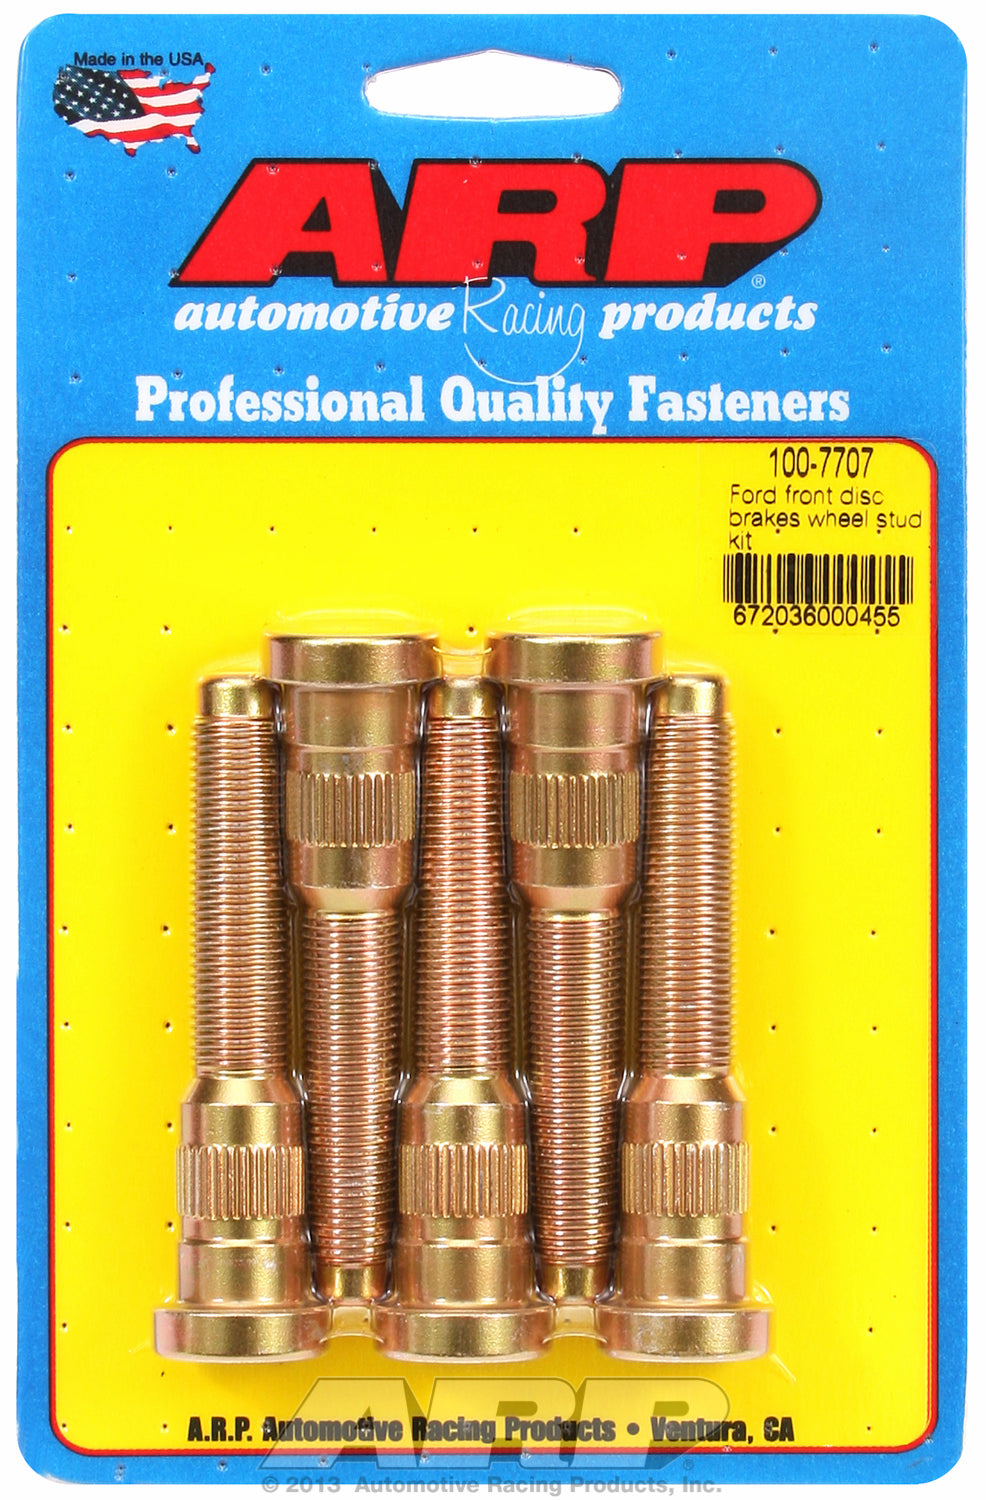 Wheel Stud Kit for Early Ford Front Disk Breaks